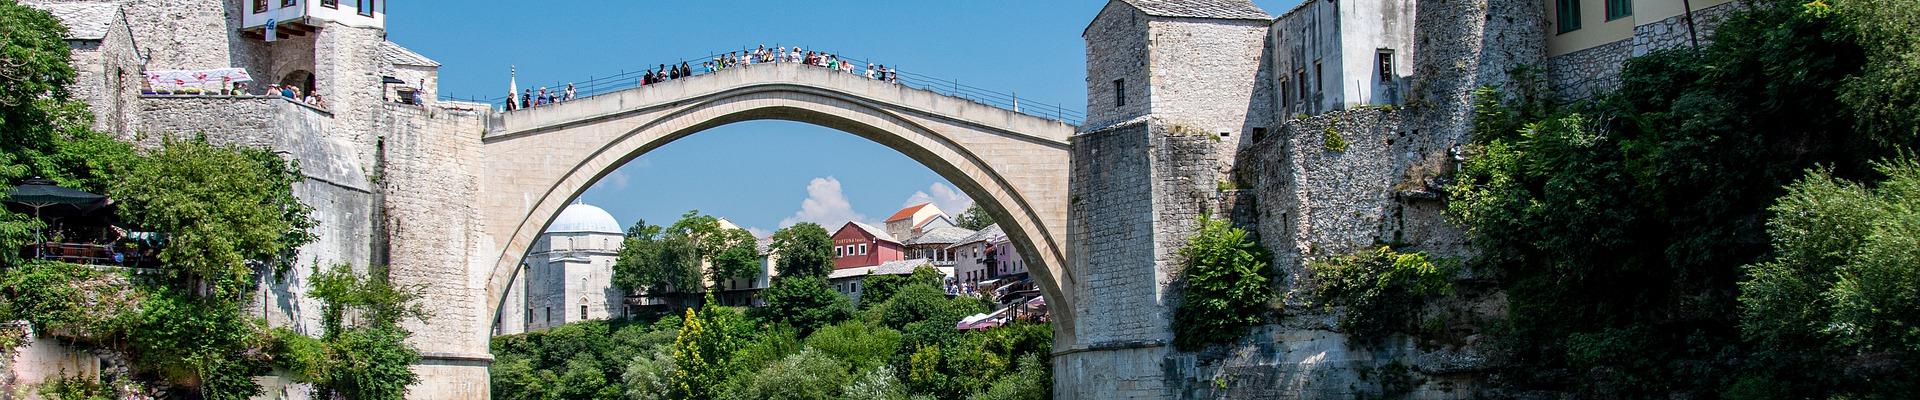 The Old Bridge spanning the Neretva River in Mostar